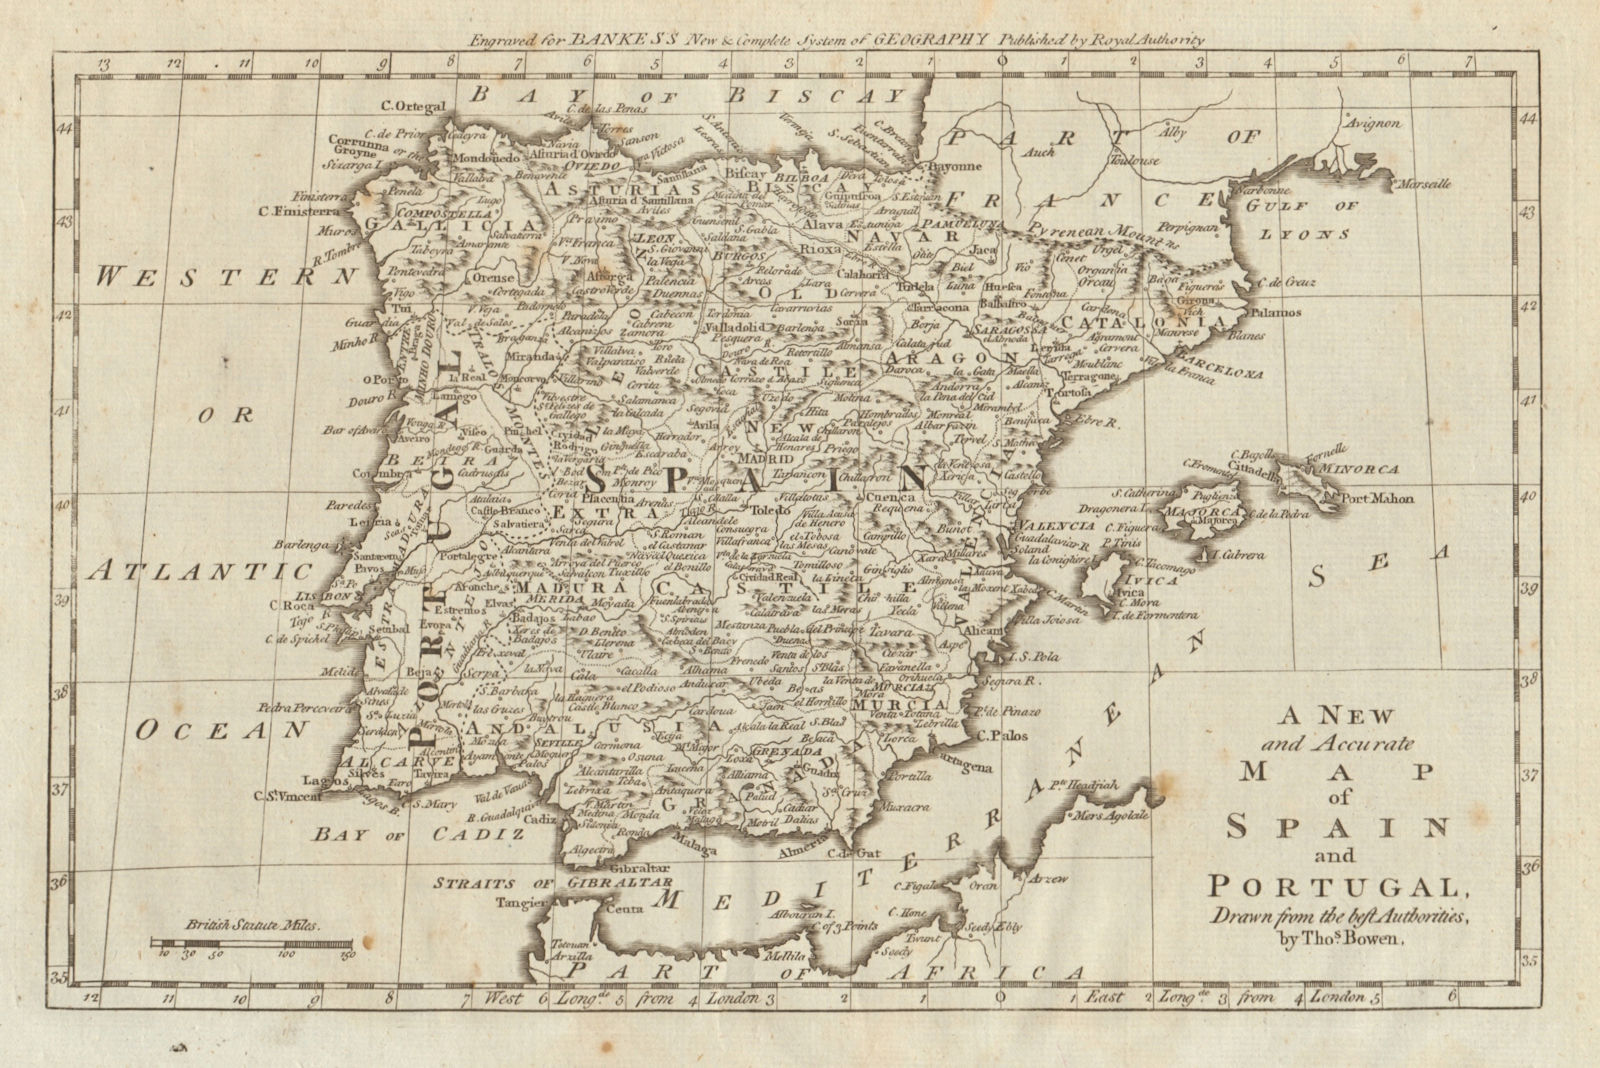 A new and accurate map of Spain and Portugal by Thomas BOWEN. Iberia 1789